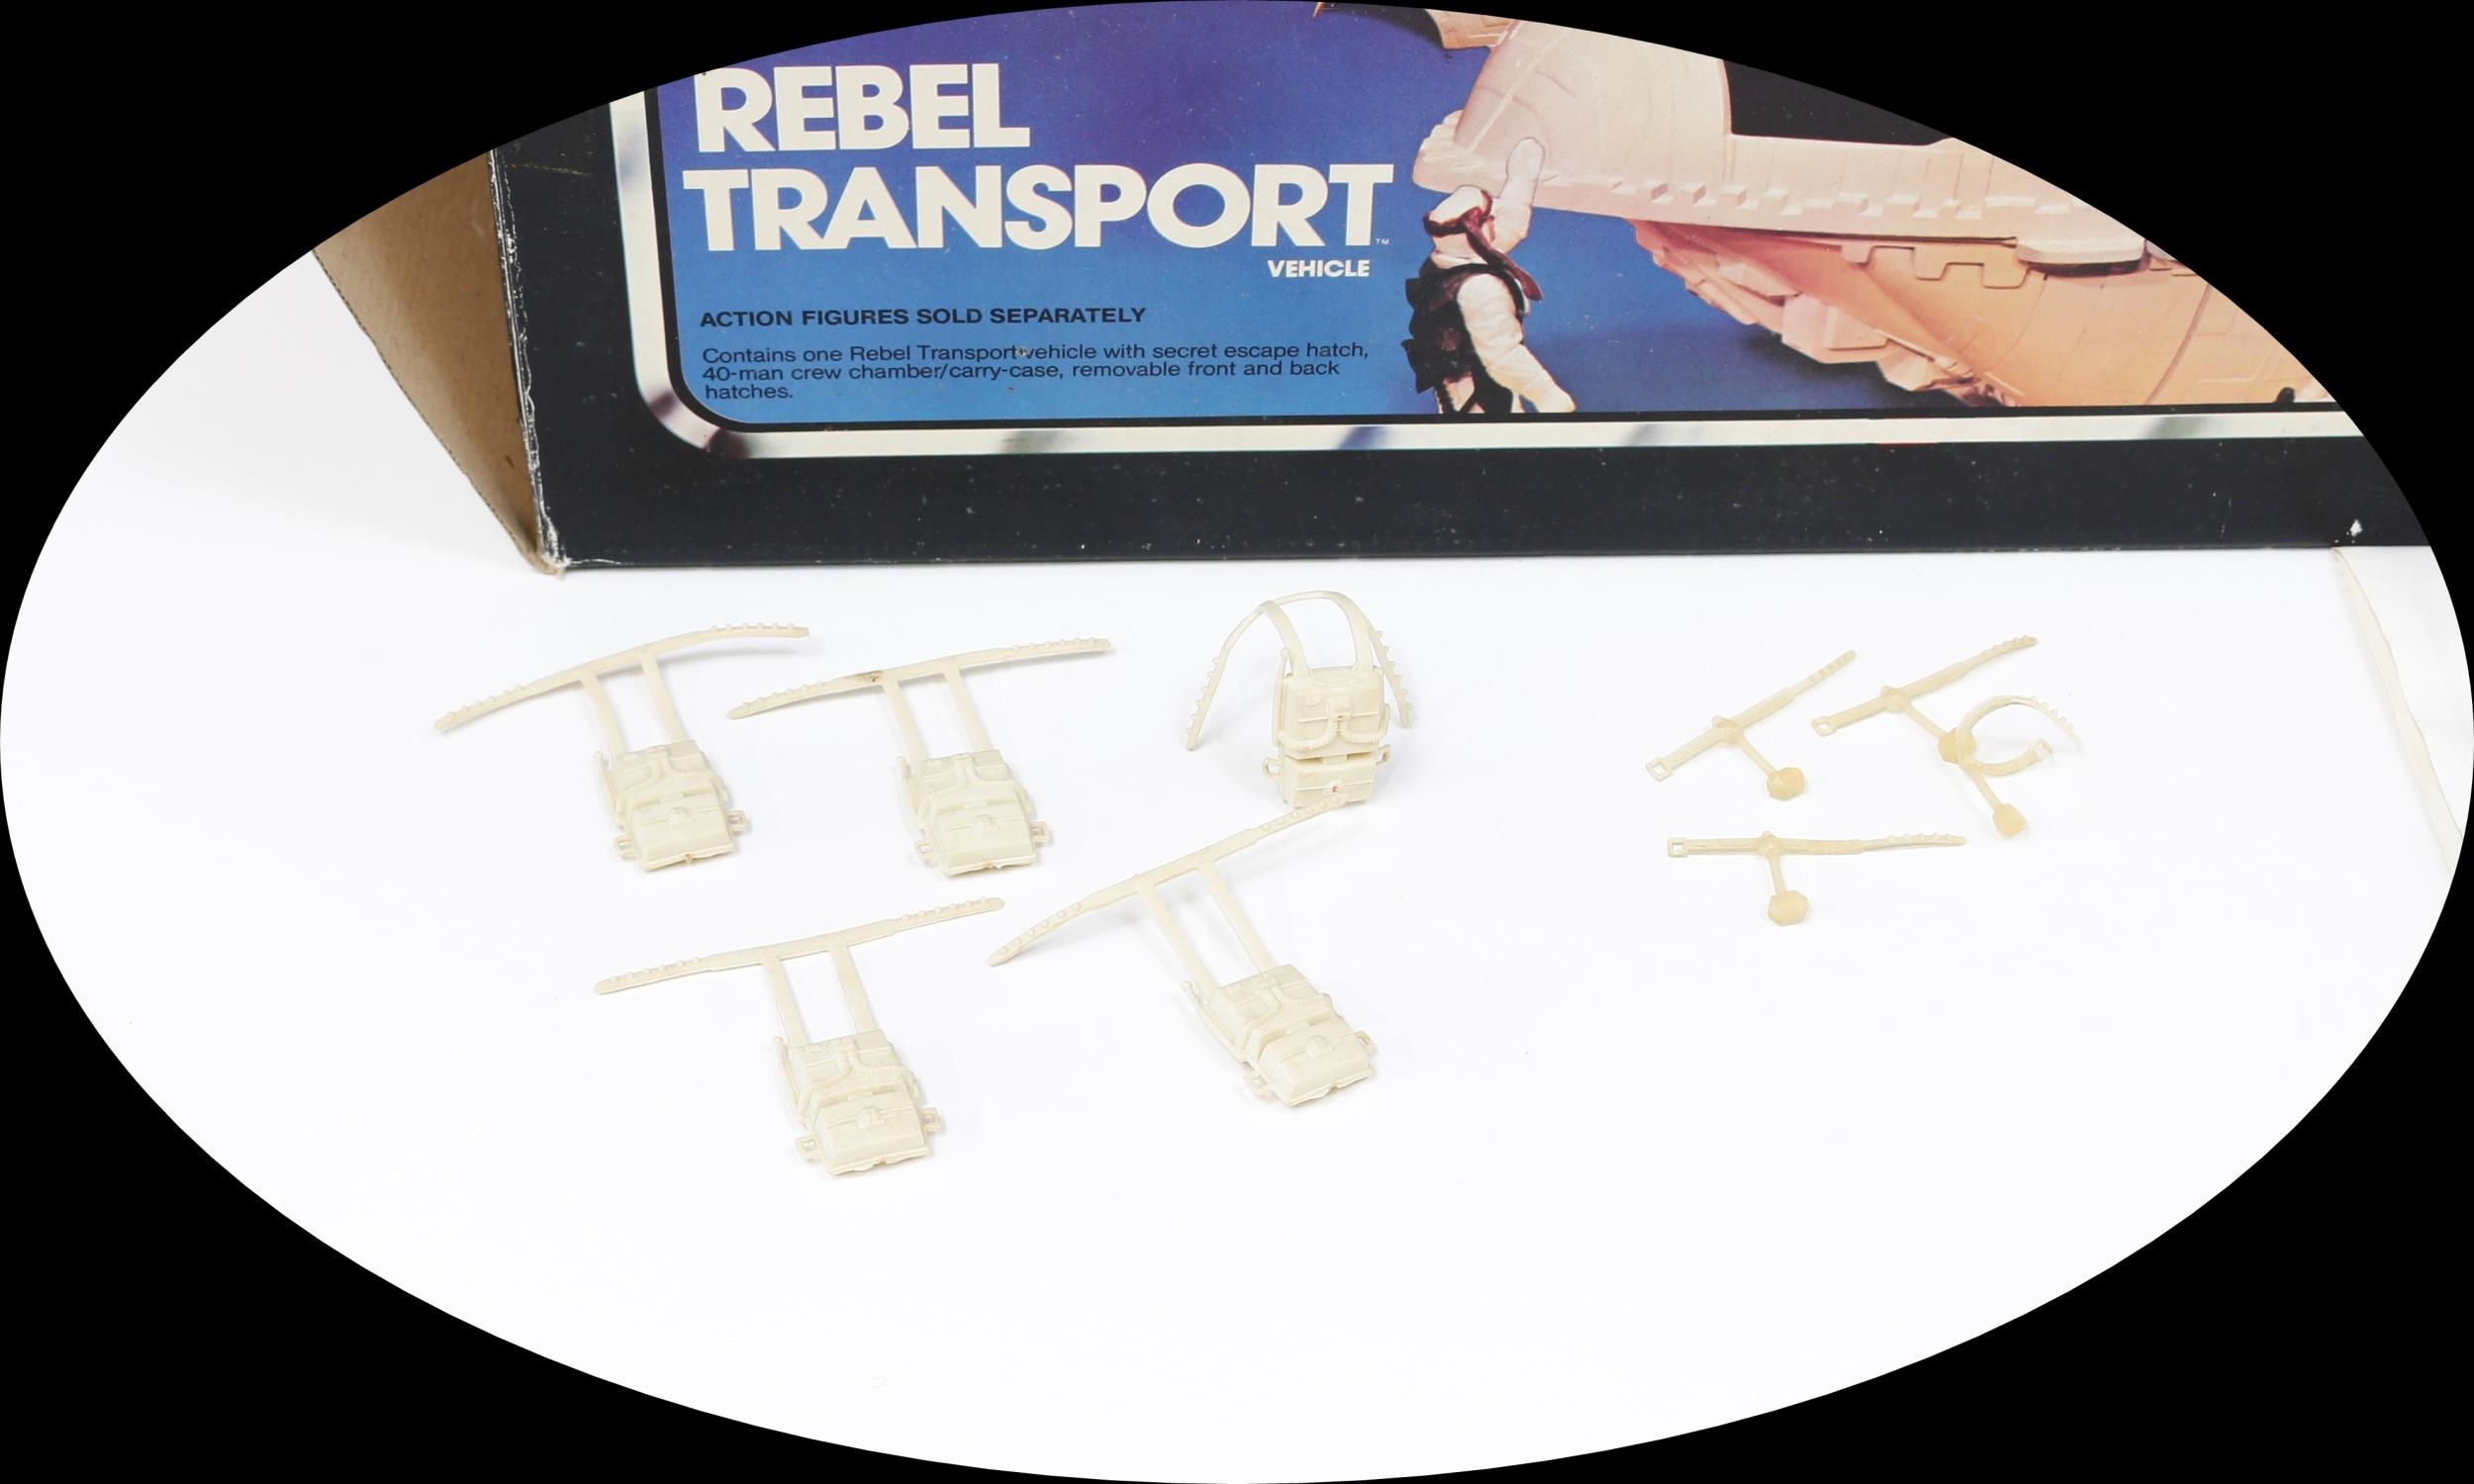 Sci-Fi Interest, Star Wars - a Palitoy Star Wars Return of the Jedi Rebel Transport vehicle, boxed - Image 2 of 4